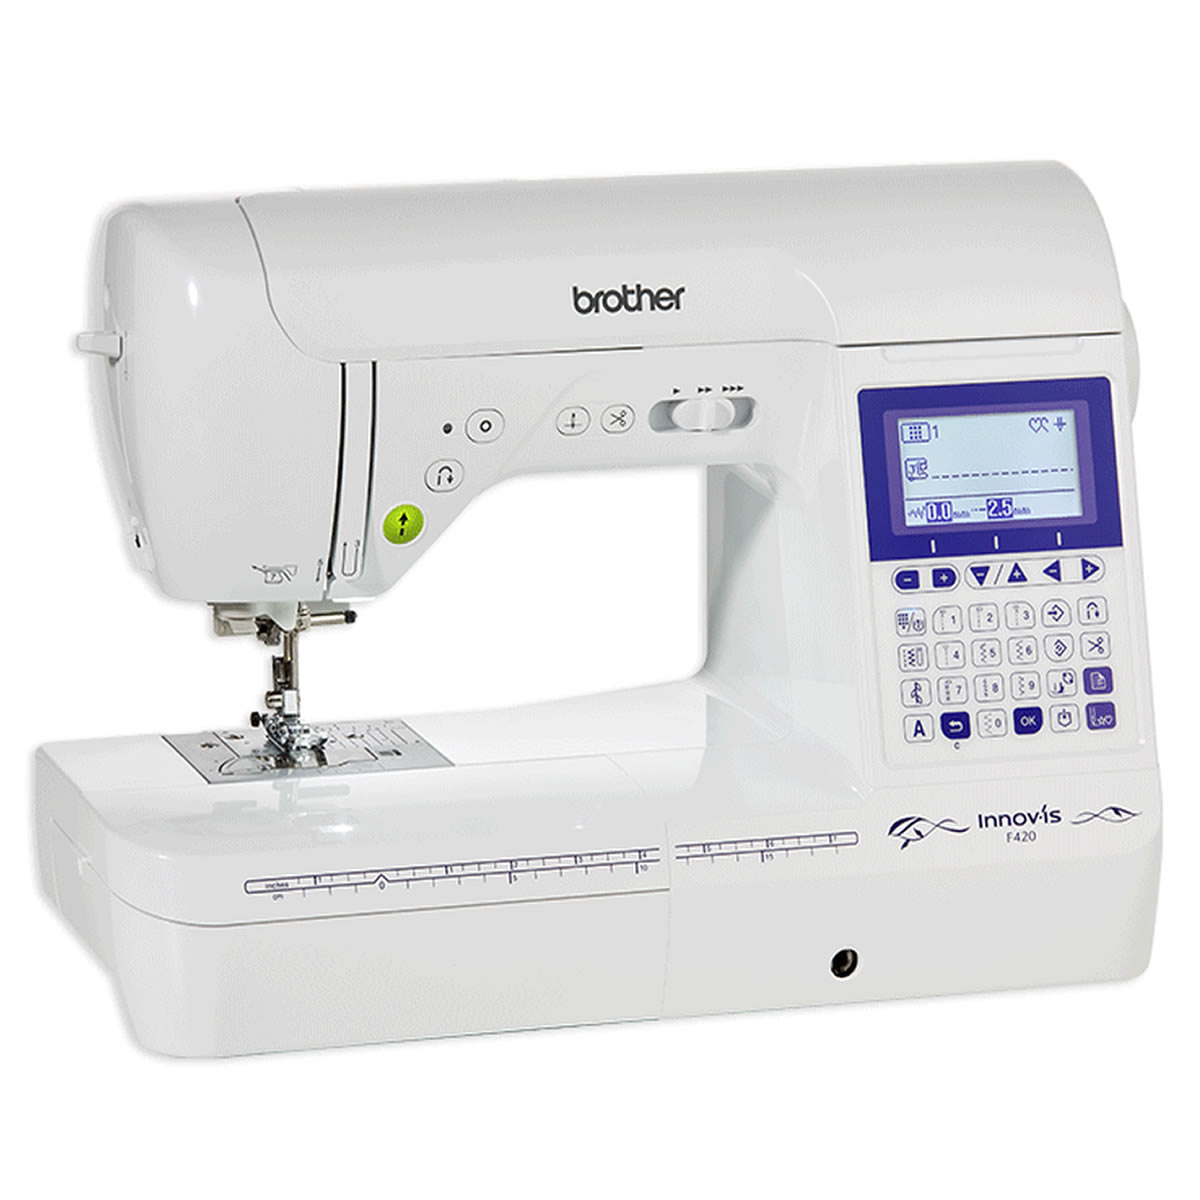 Brother InnovIs F420 Computer Sewing Machine